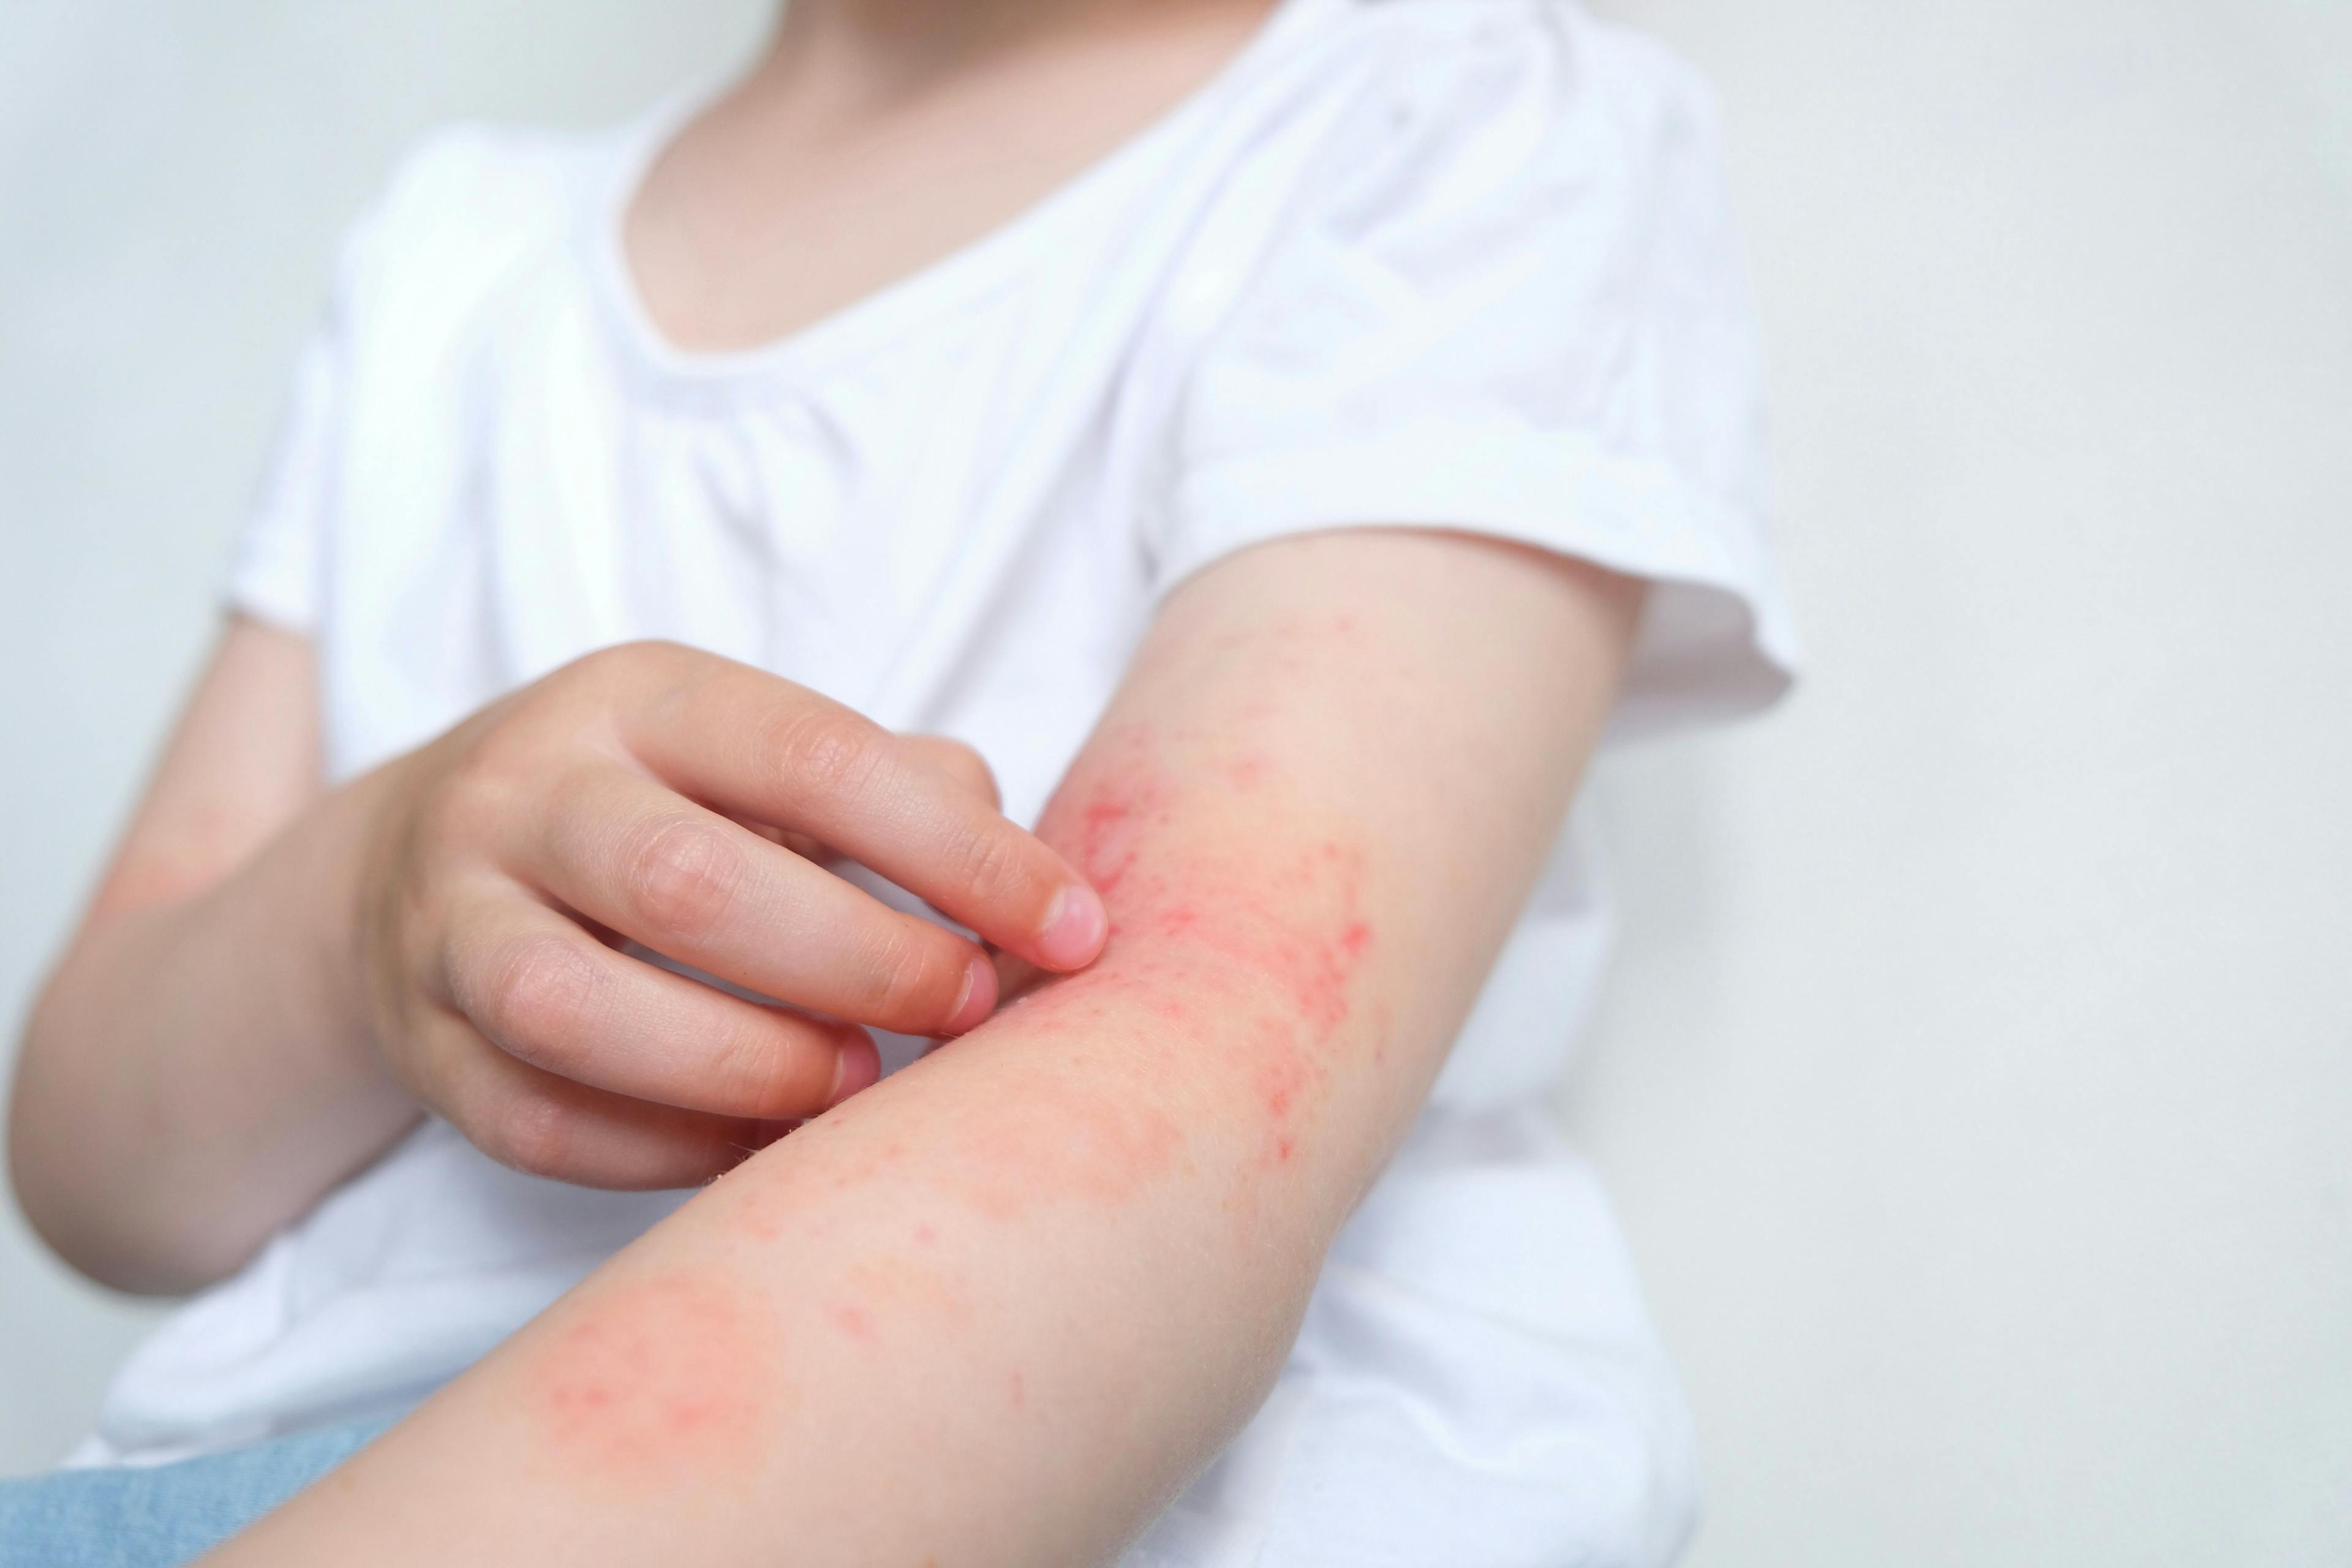 Study Explores if Atopic Dermatitis is Only a Skin Disease 